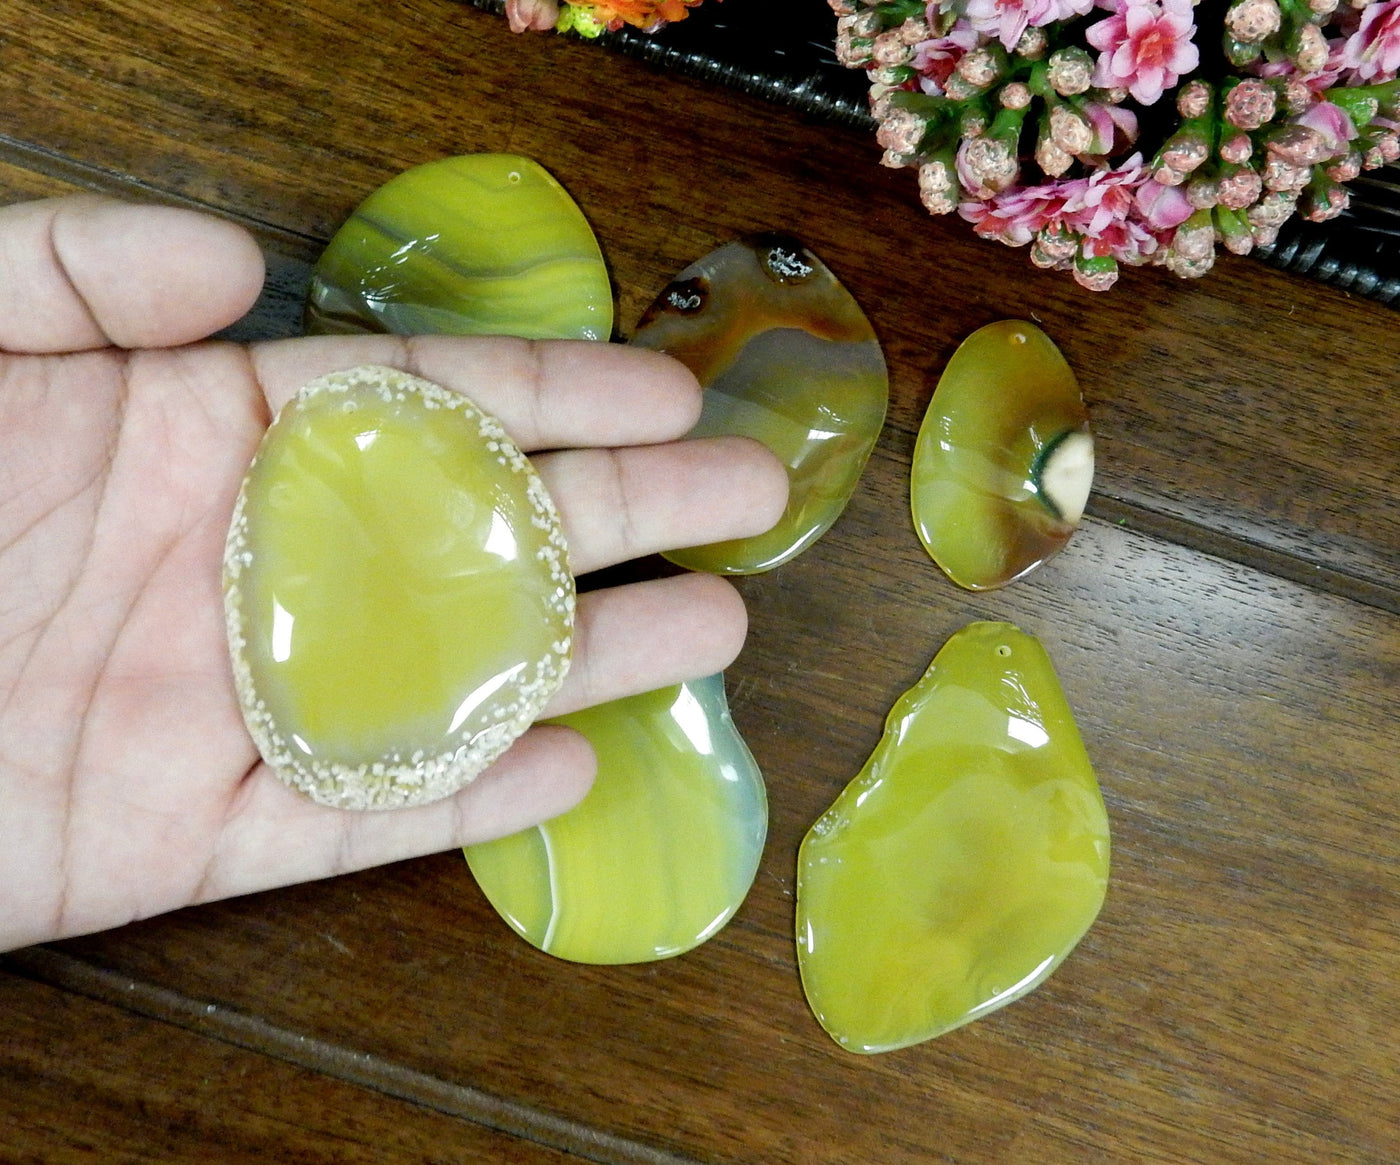  Yellow Freeform Agate Slice with Polished Edge In Hand on Wooden Background.